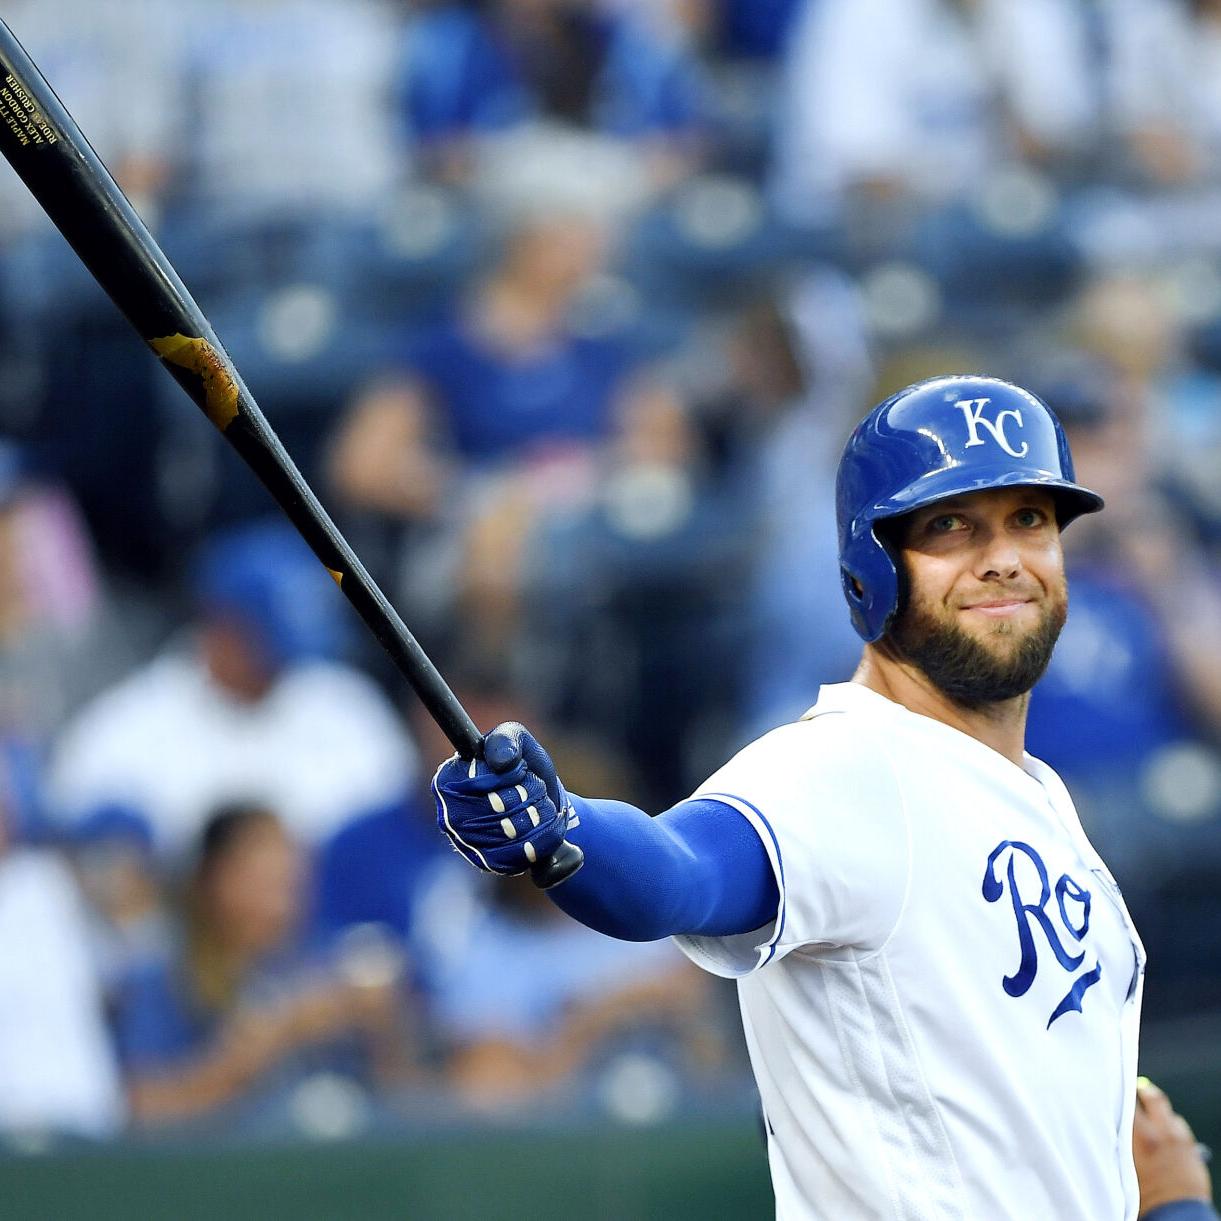 Alex Gordon: The Royal Leader. The veteran outfielder is leading a